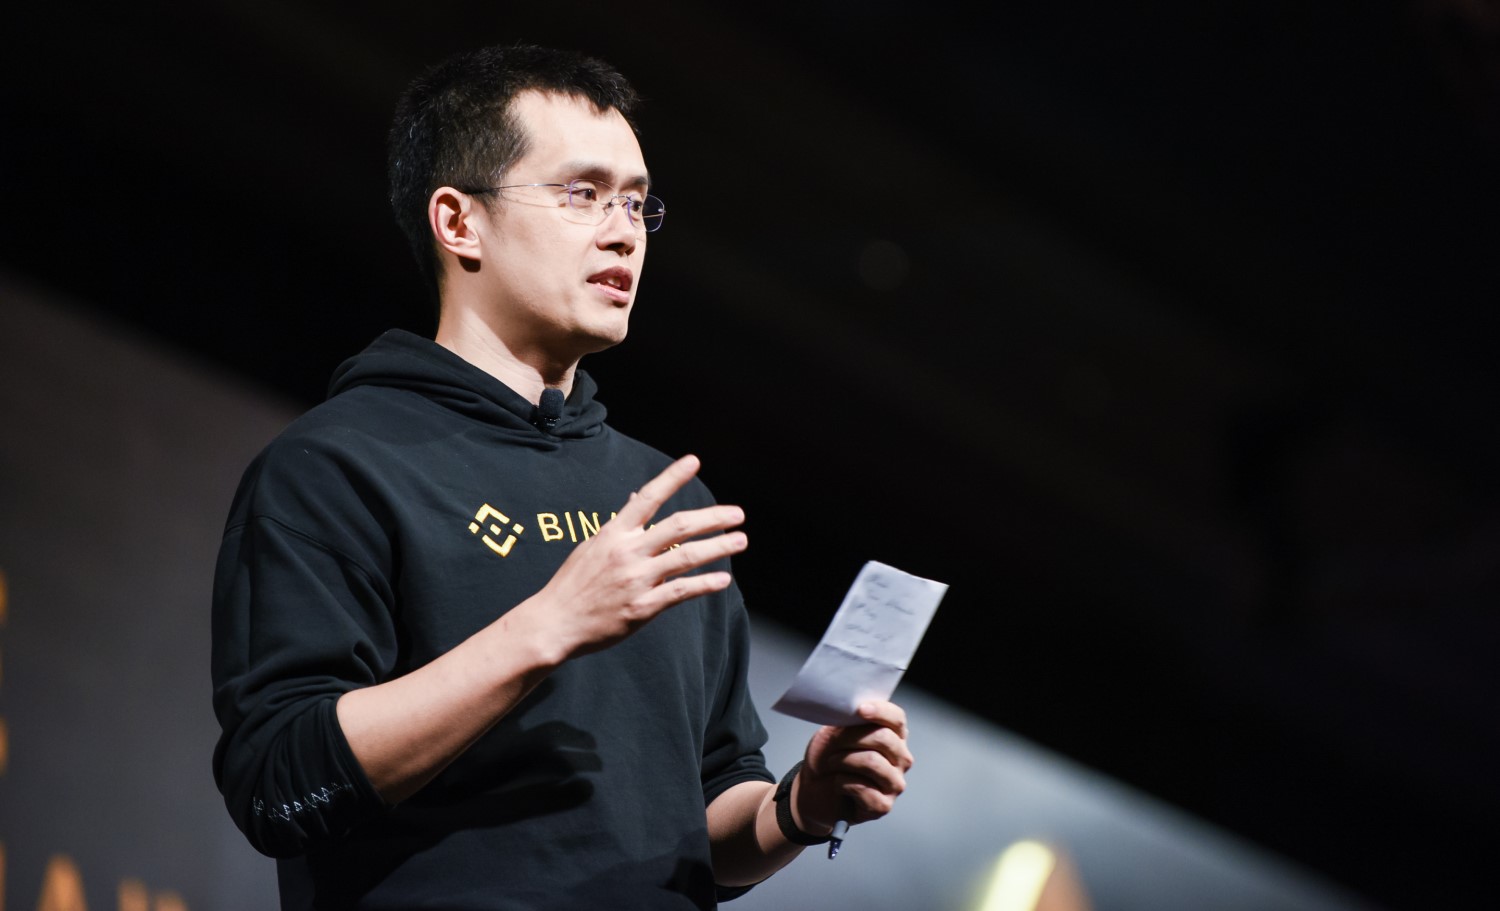 Binance Launches Platform ‘2.0’ As Margin Trading Goes Live